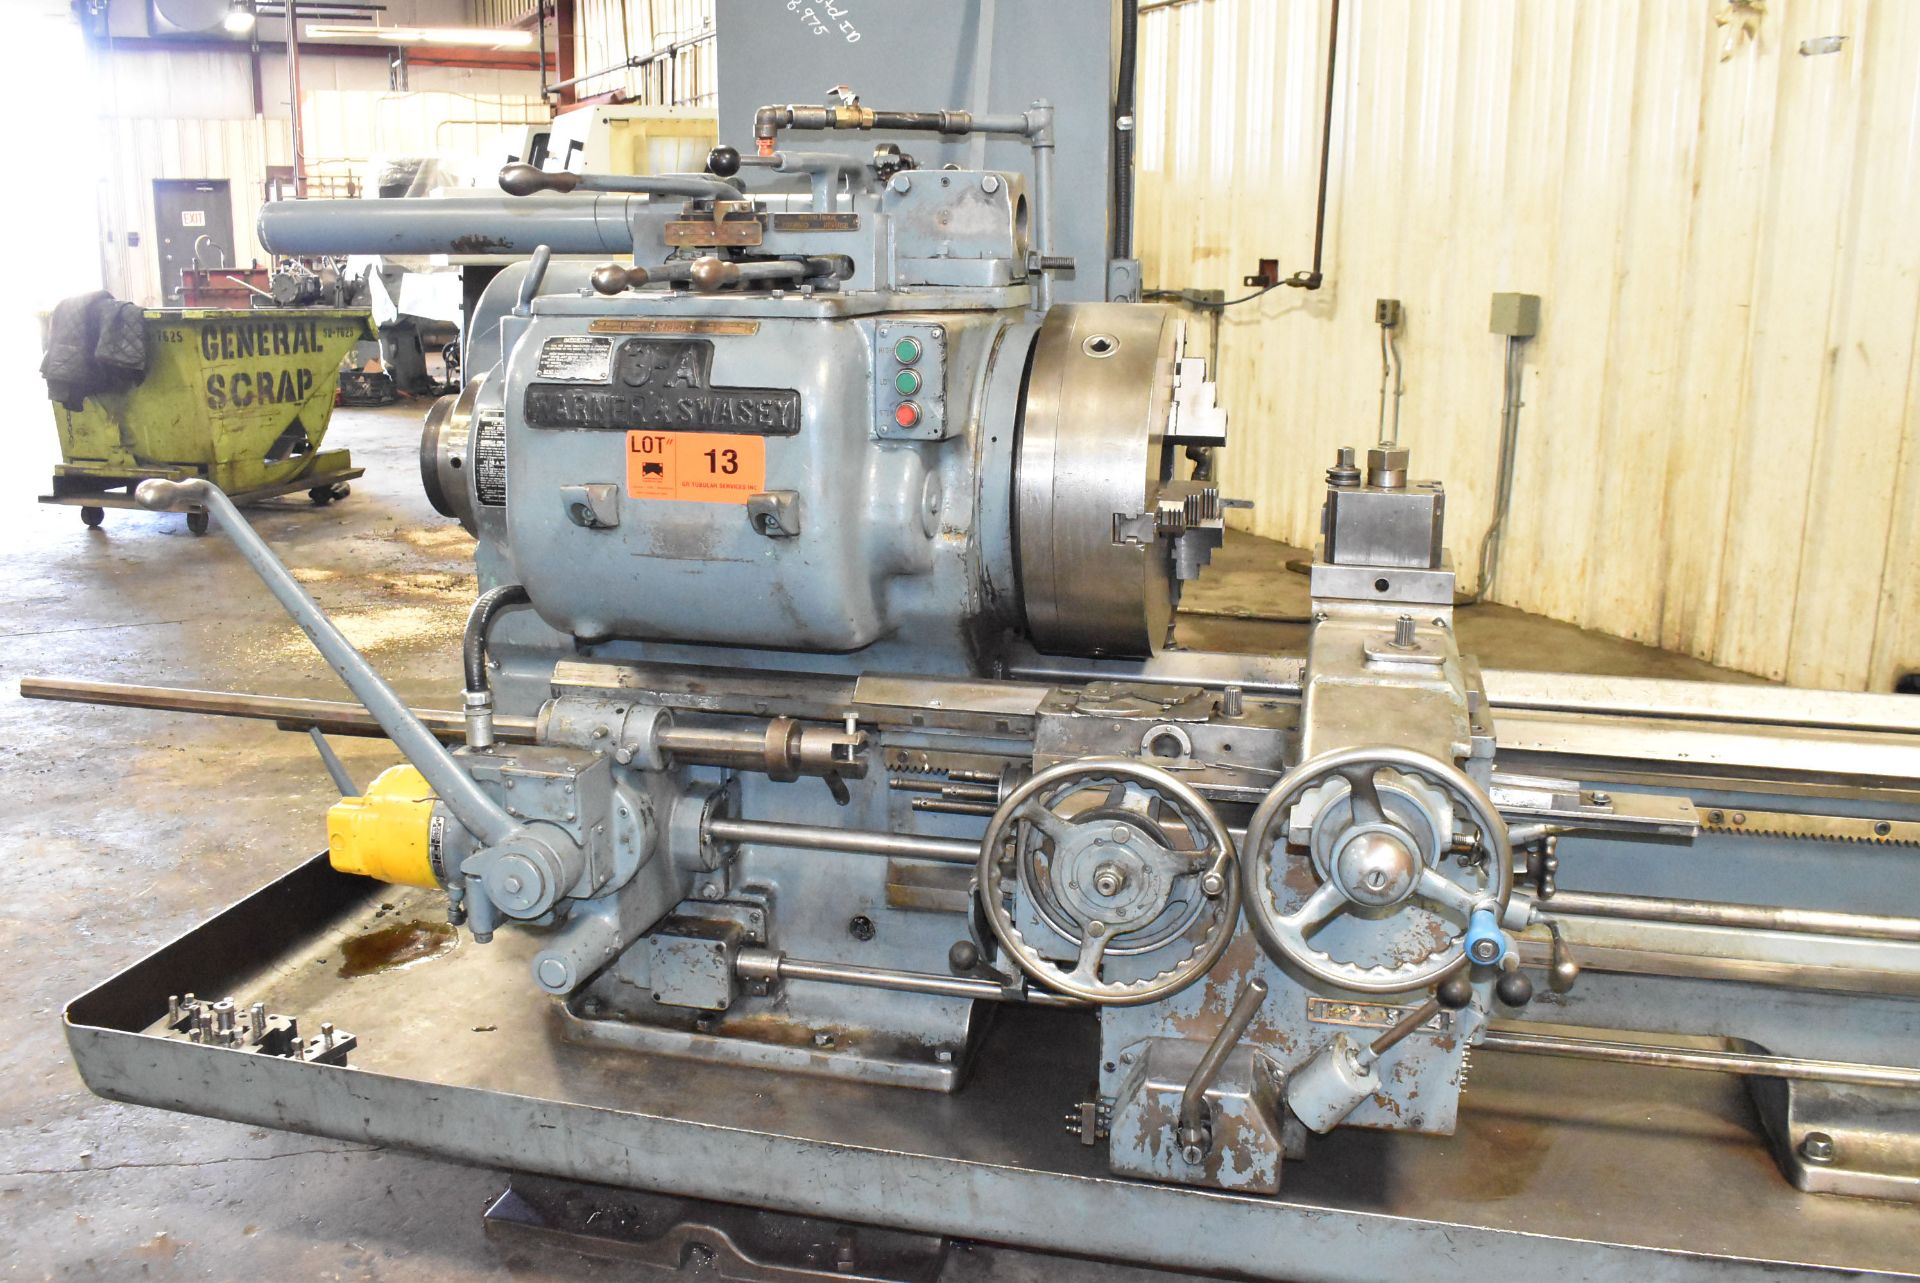 WARNER & SWASEY 3A TURRET LATHE WITH 24" SWING OVER BED, 52" DISTANCE BETWEEN CENTERS, 6.25" SPINDLE - Image 2 of 9